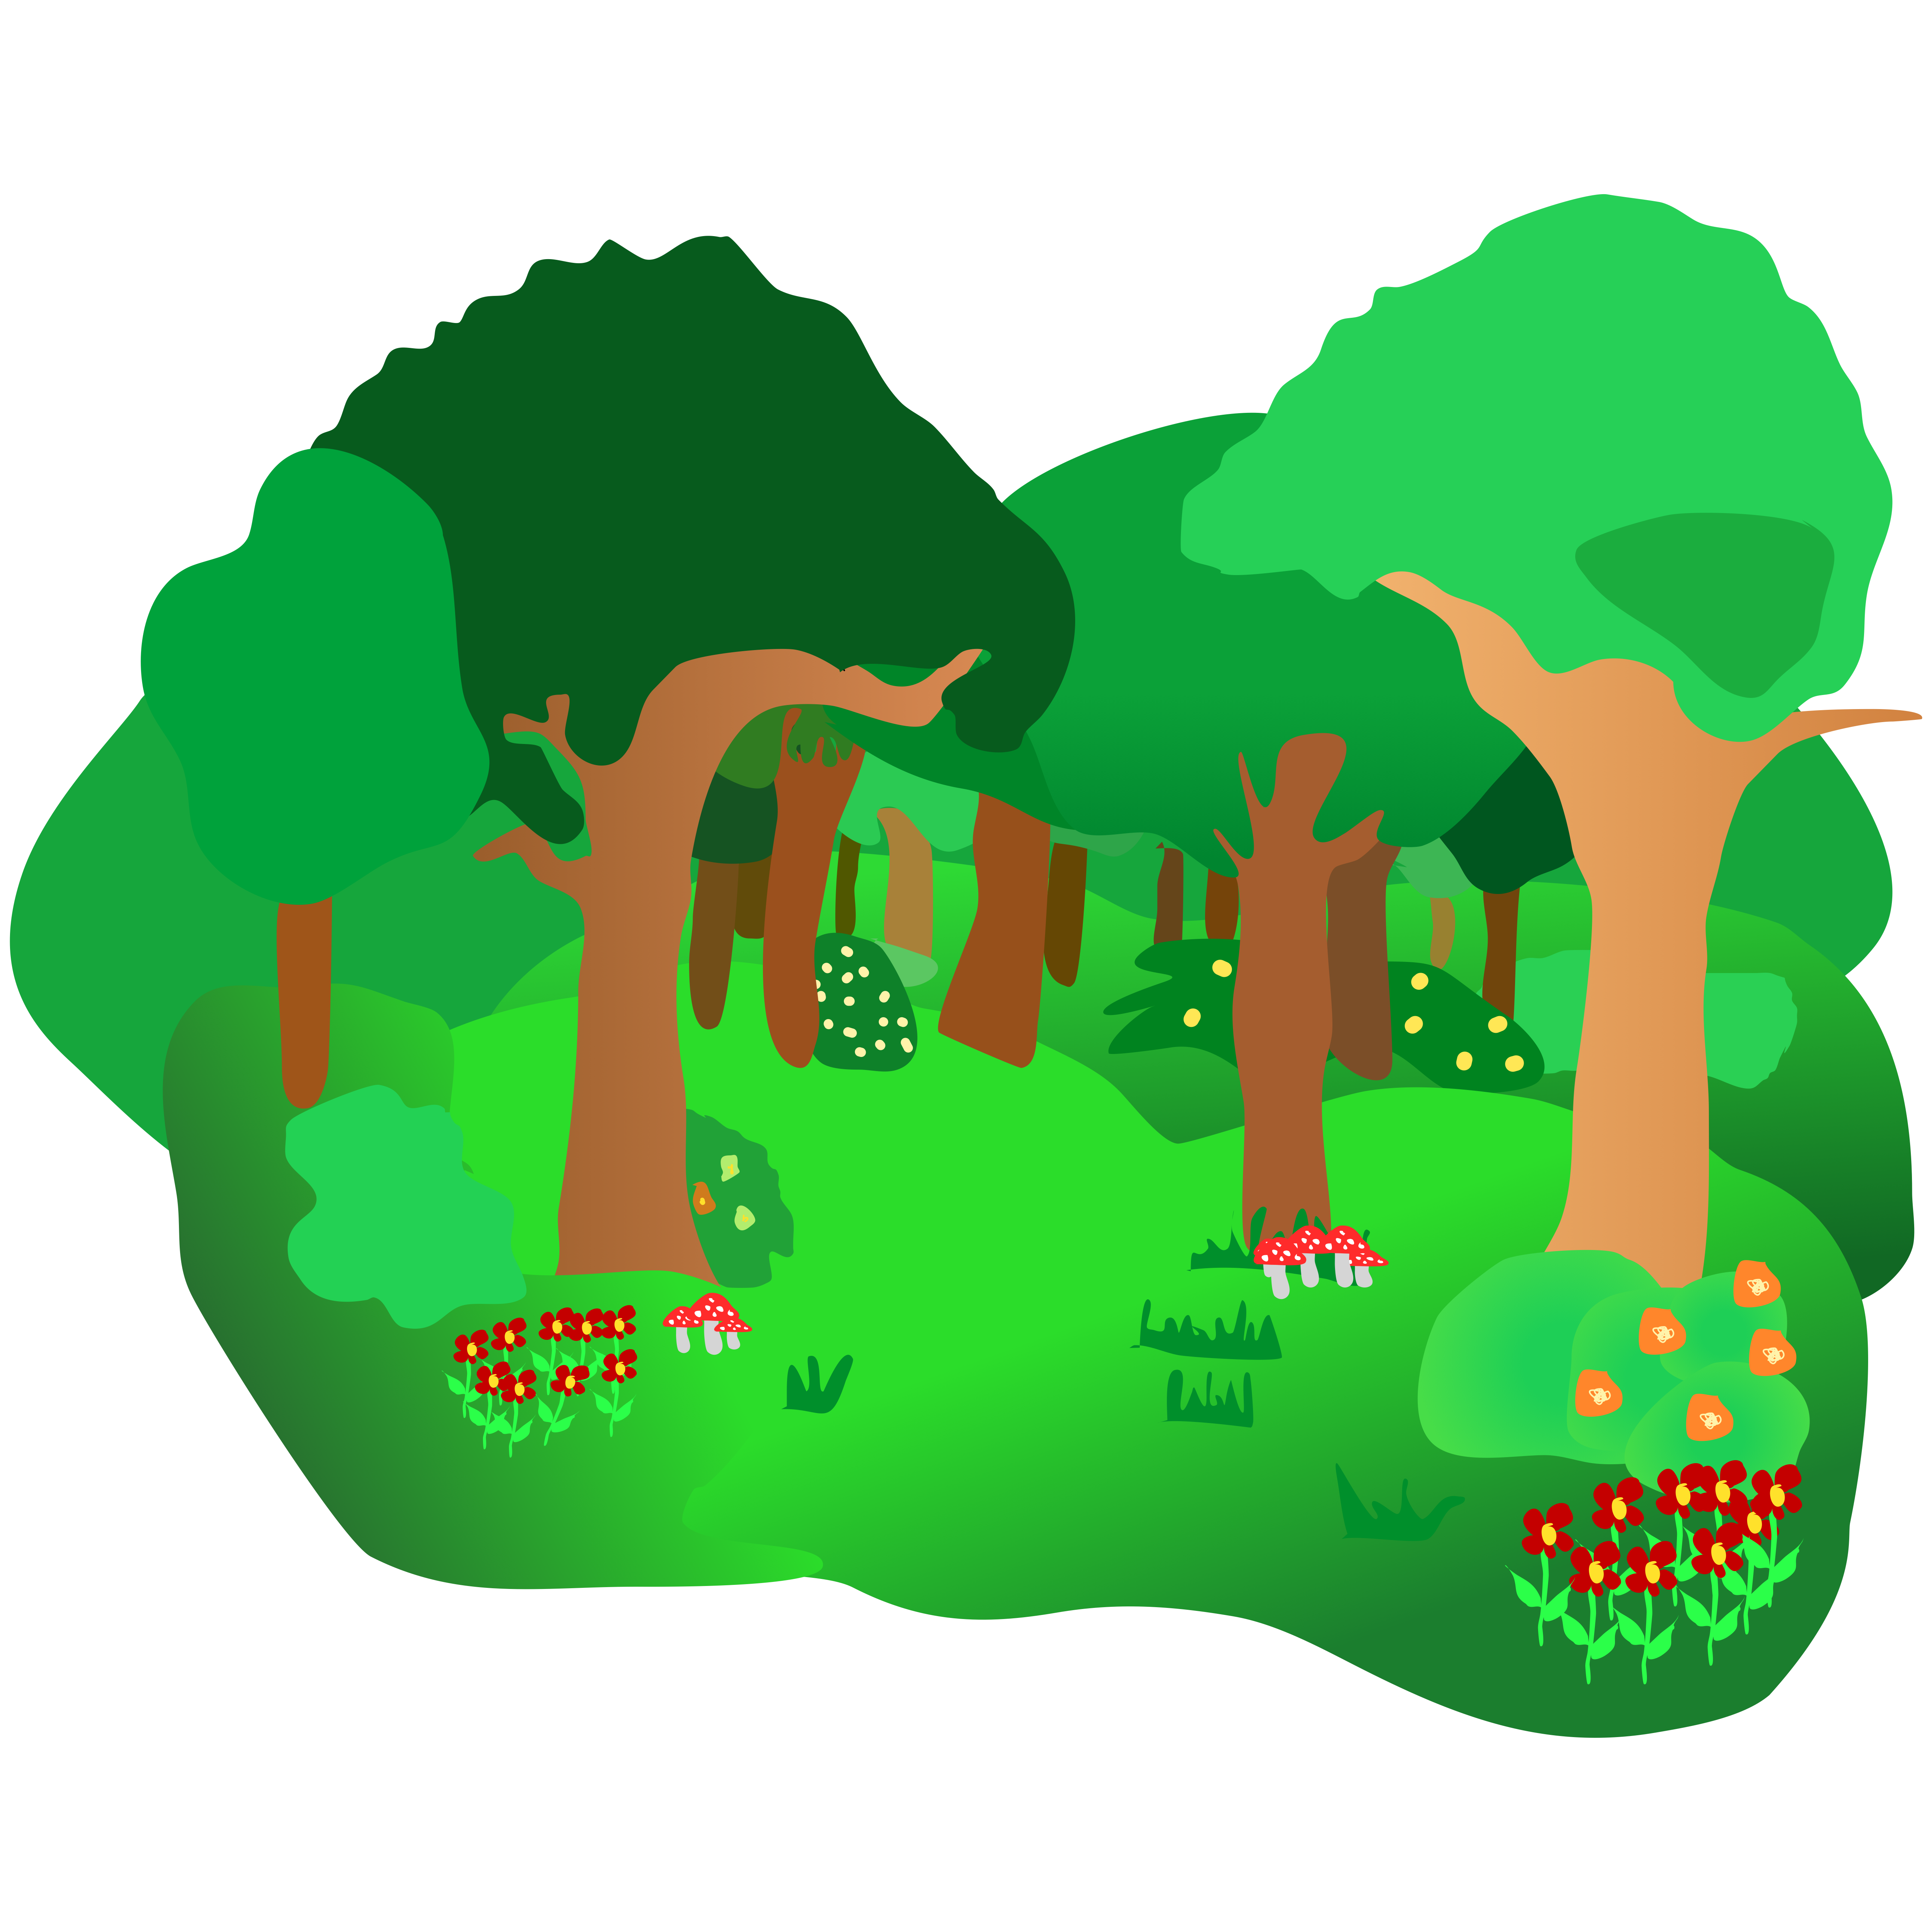 Forest image vector.